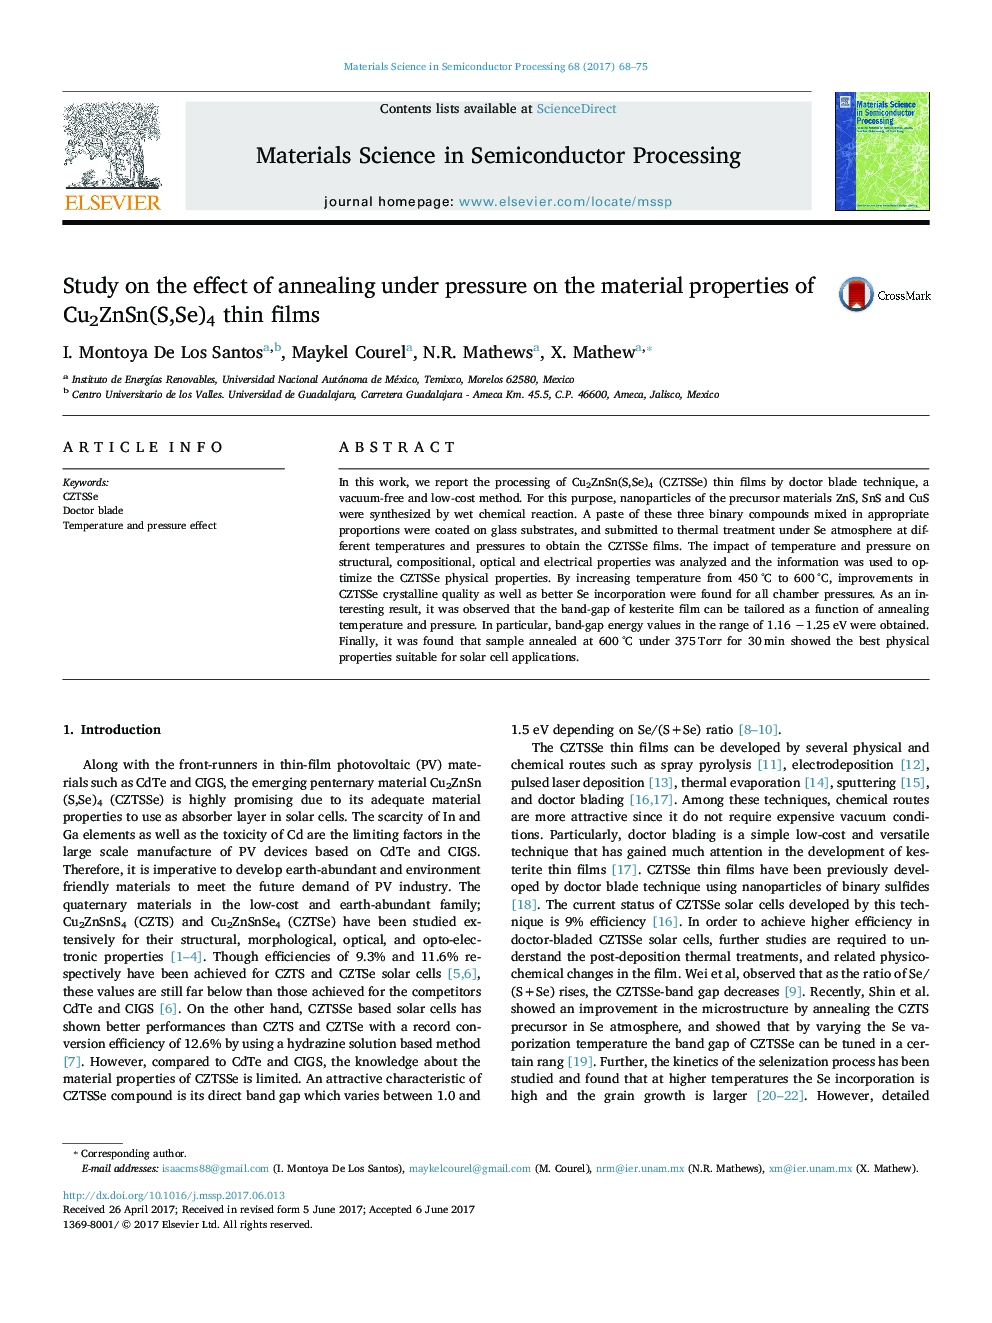 Study on the effect of annealing under pressure on the material properties of Cu2ZnSn(S,Se)4 thin films